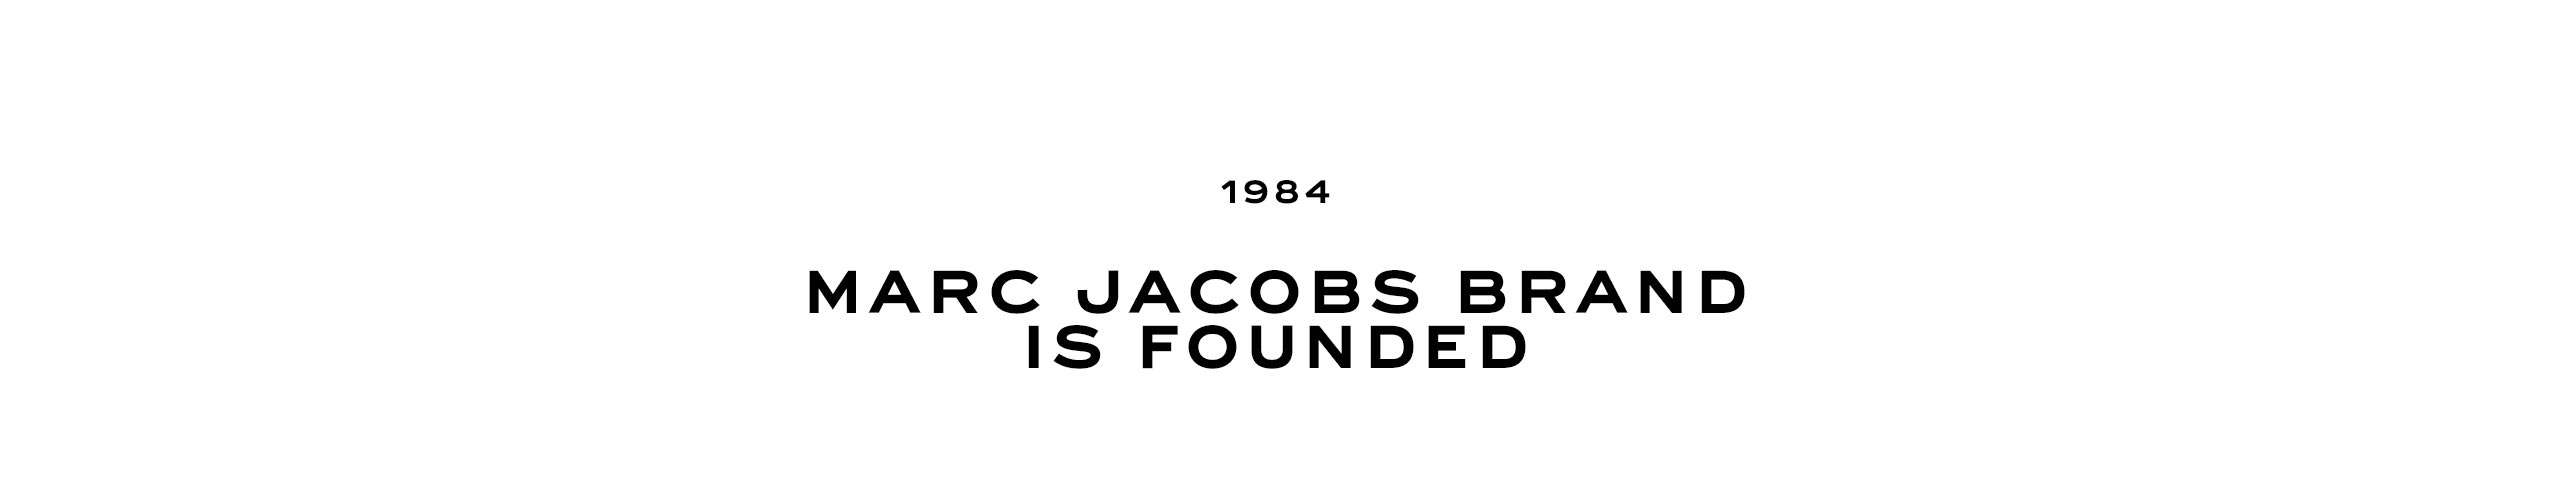 1984: Marc Jacobs brand is founded.